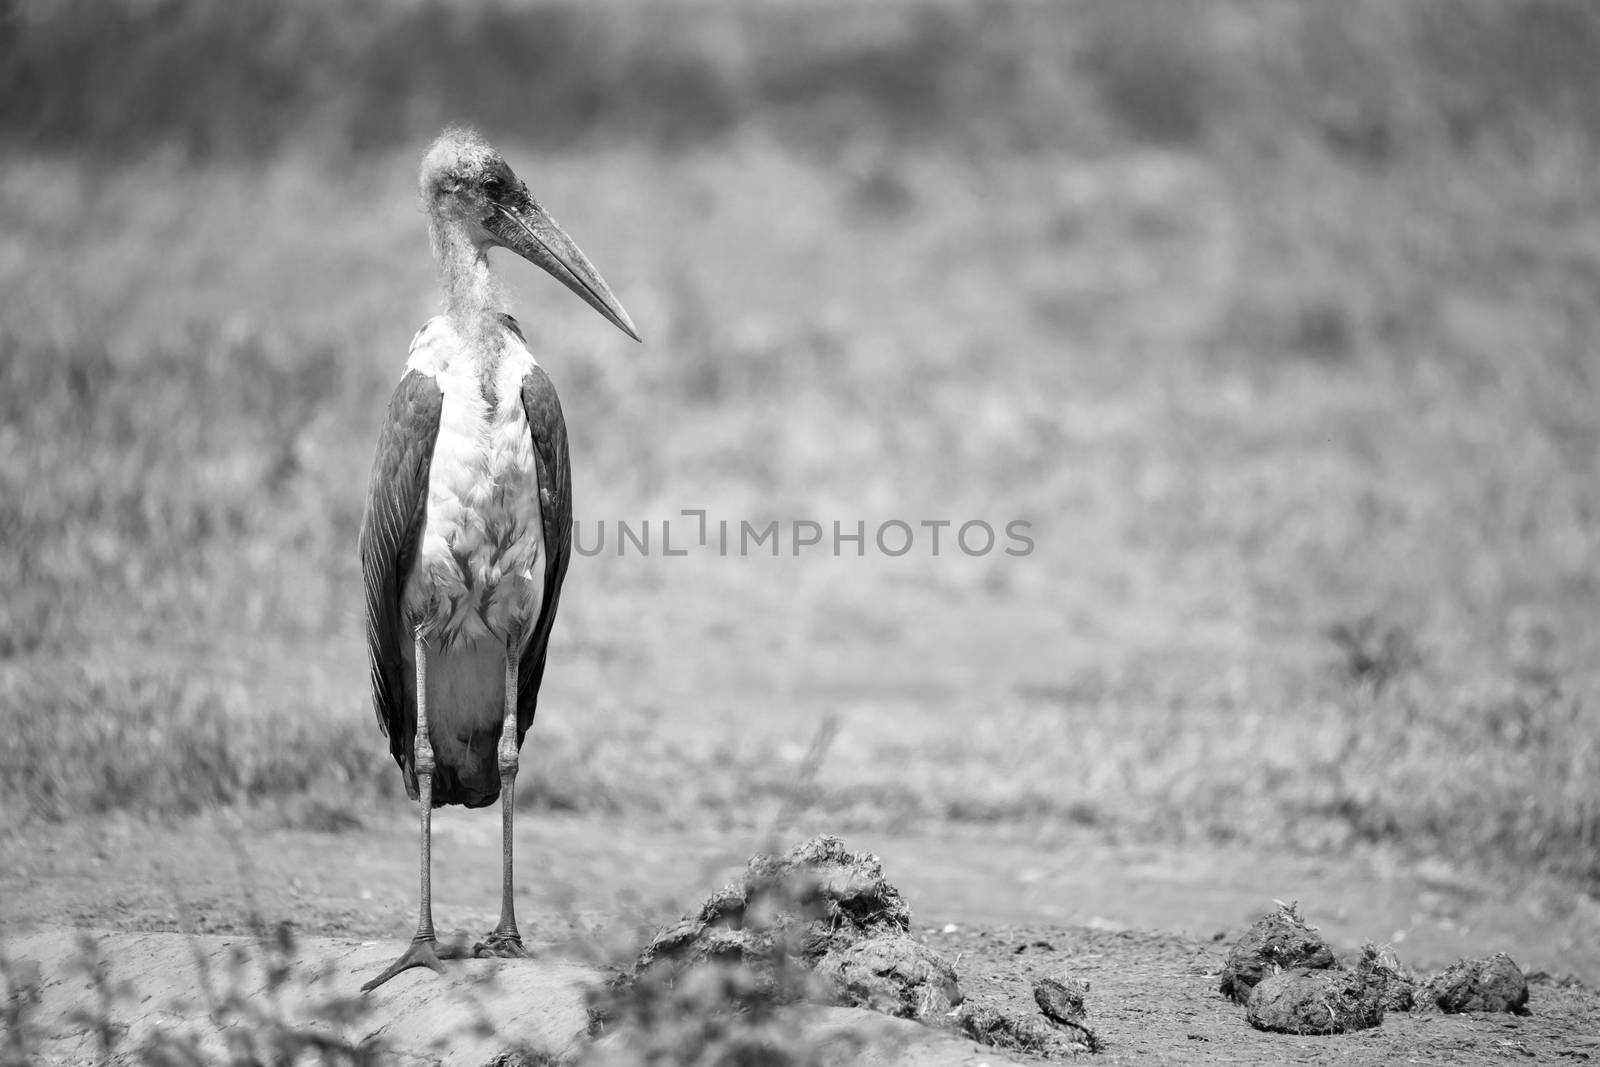 A marabou bird in the savanna with red soil by 25ehaag6